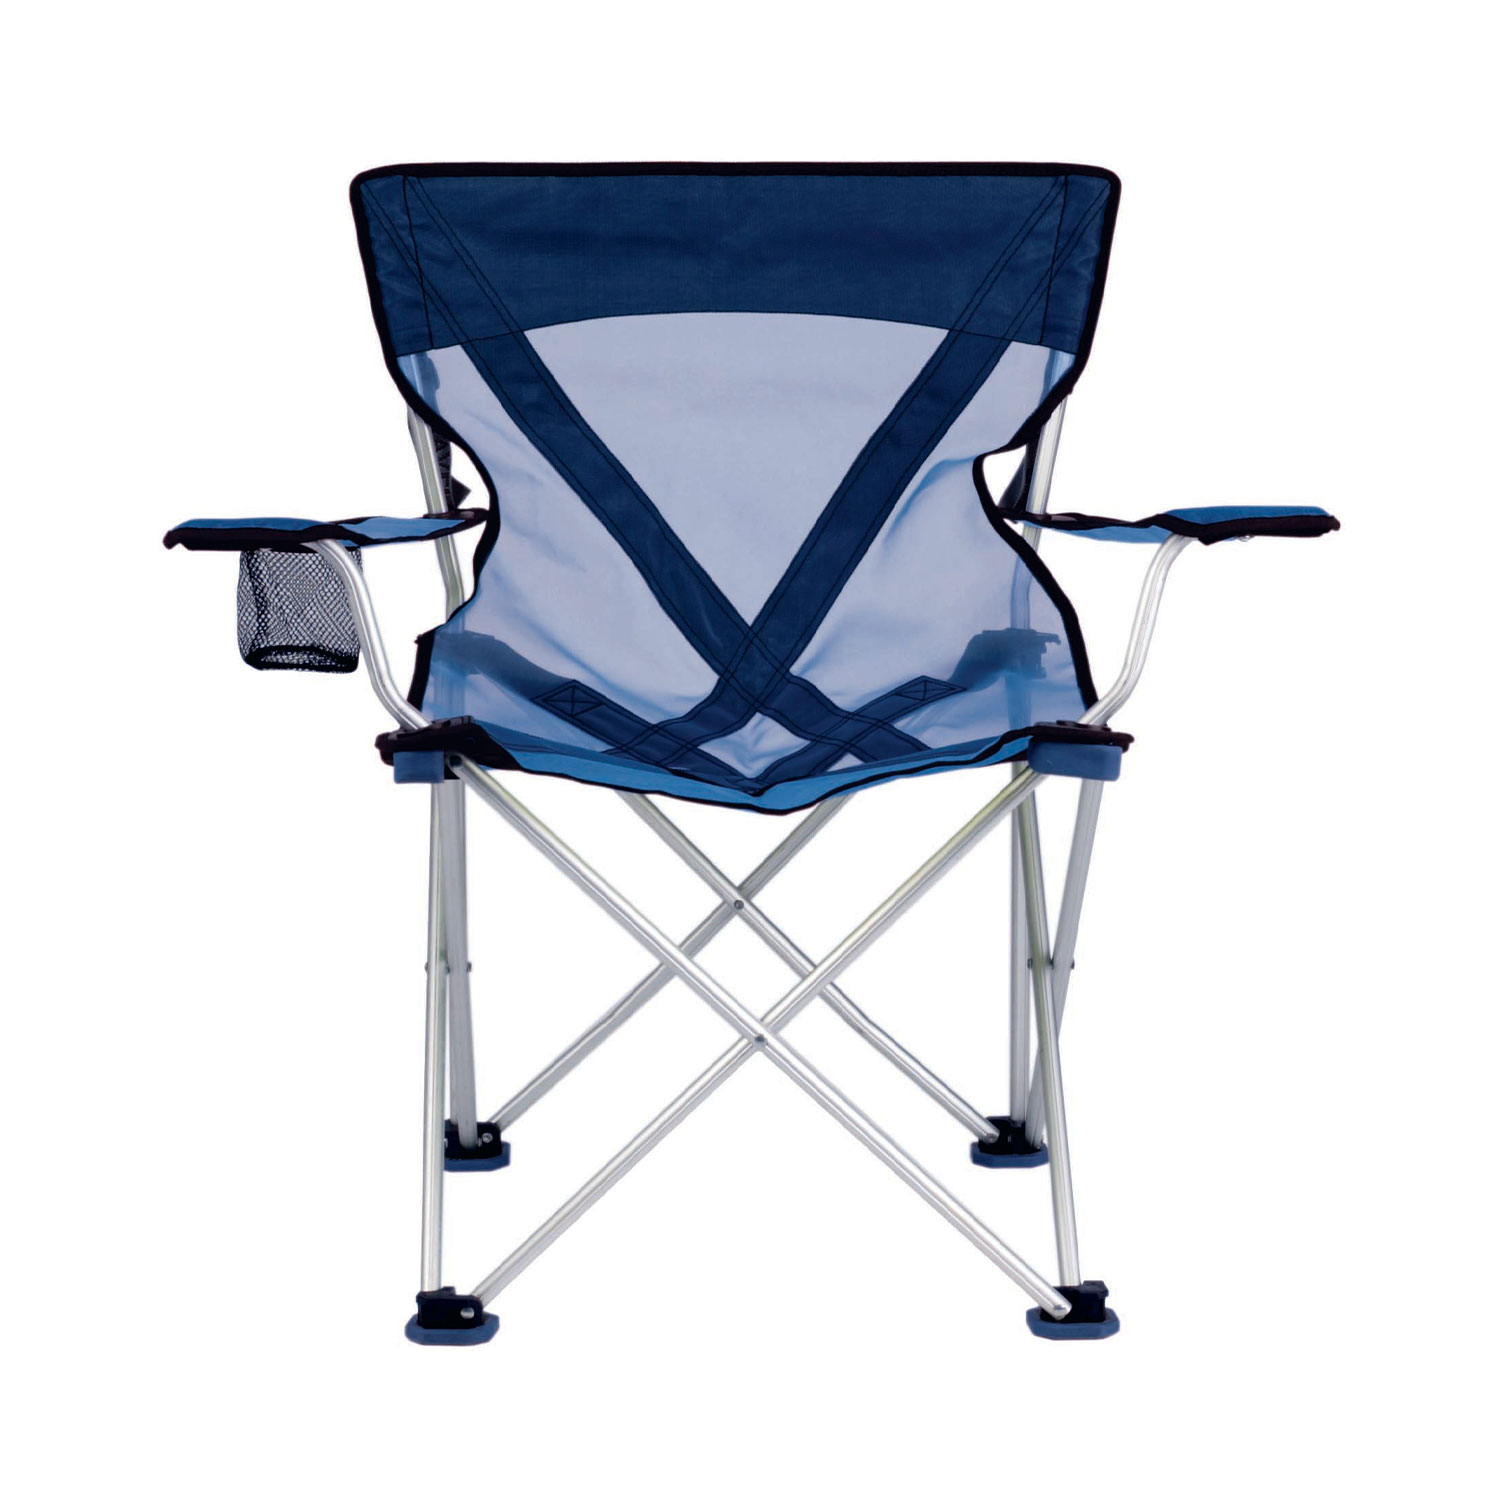 TravelChair Teddy Steel Camping Chair - Blue - image 1 of 6